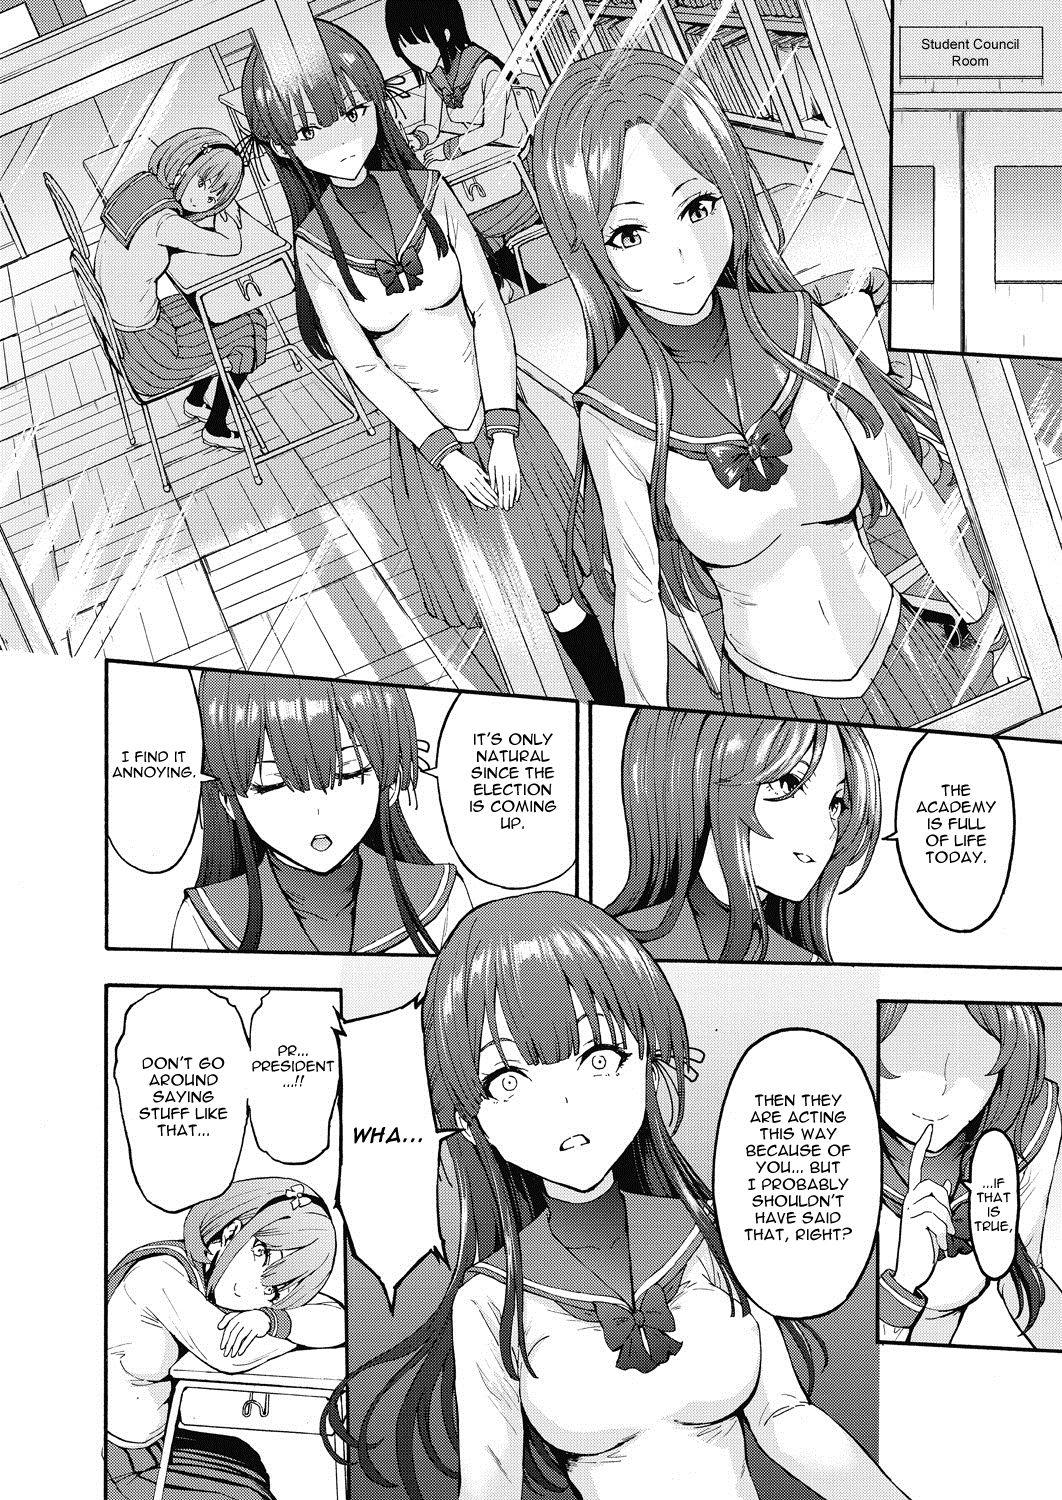 Student Council President The Dark Side Part 1 7